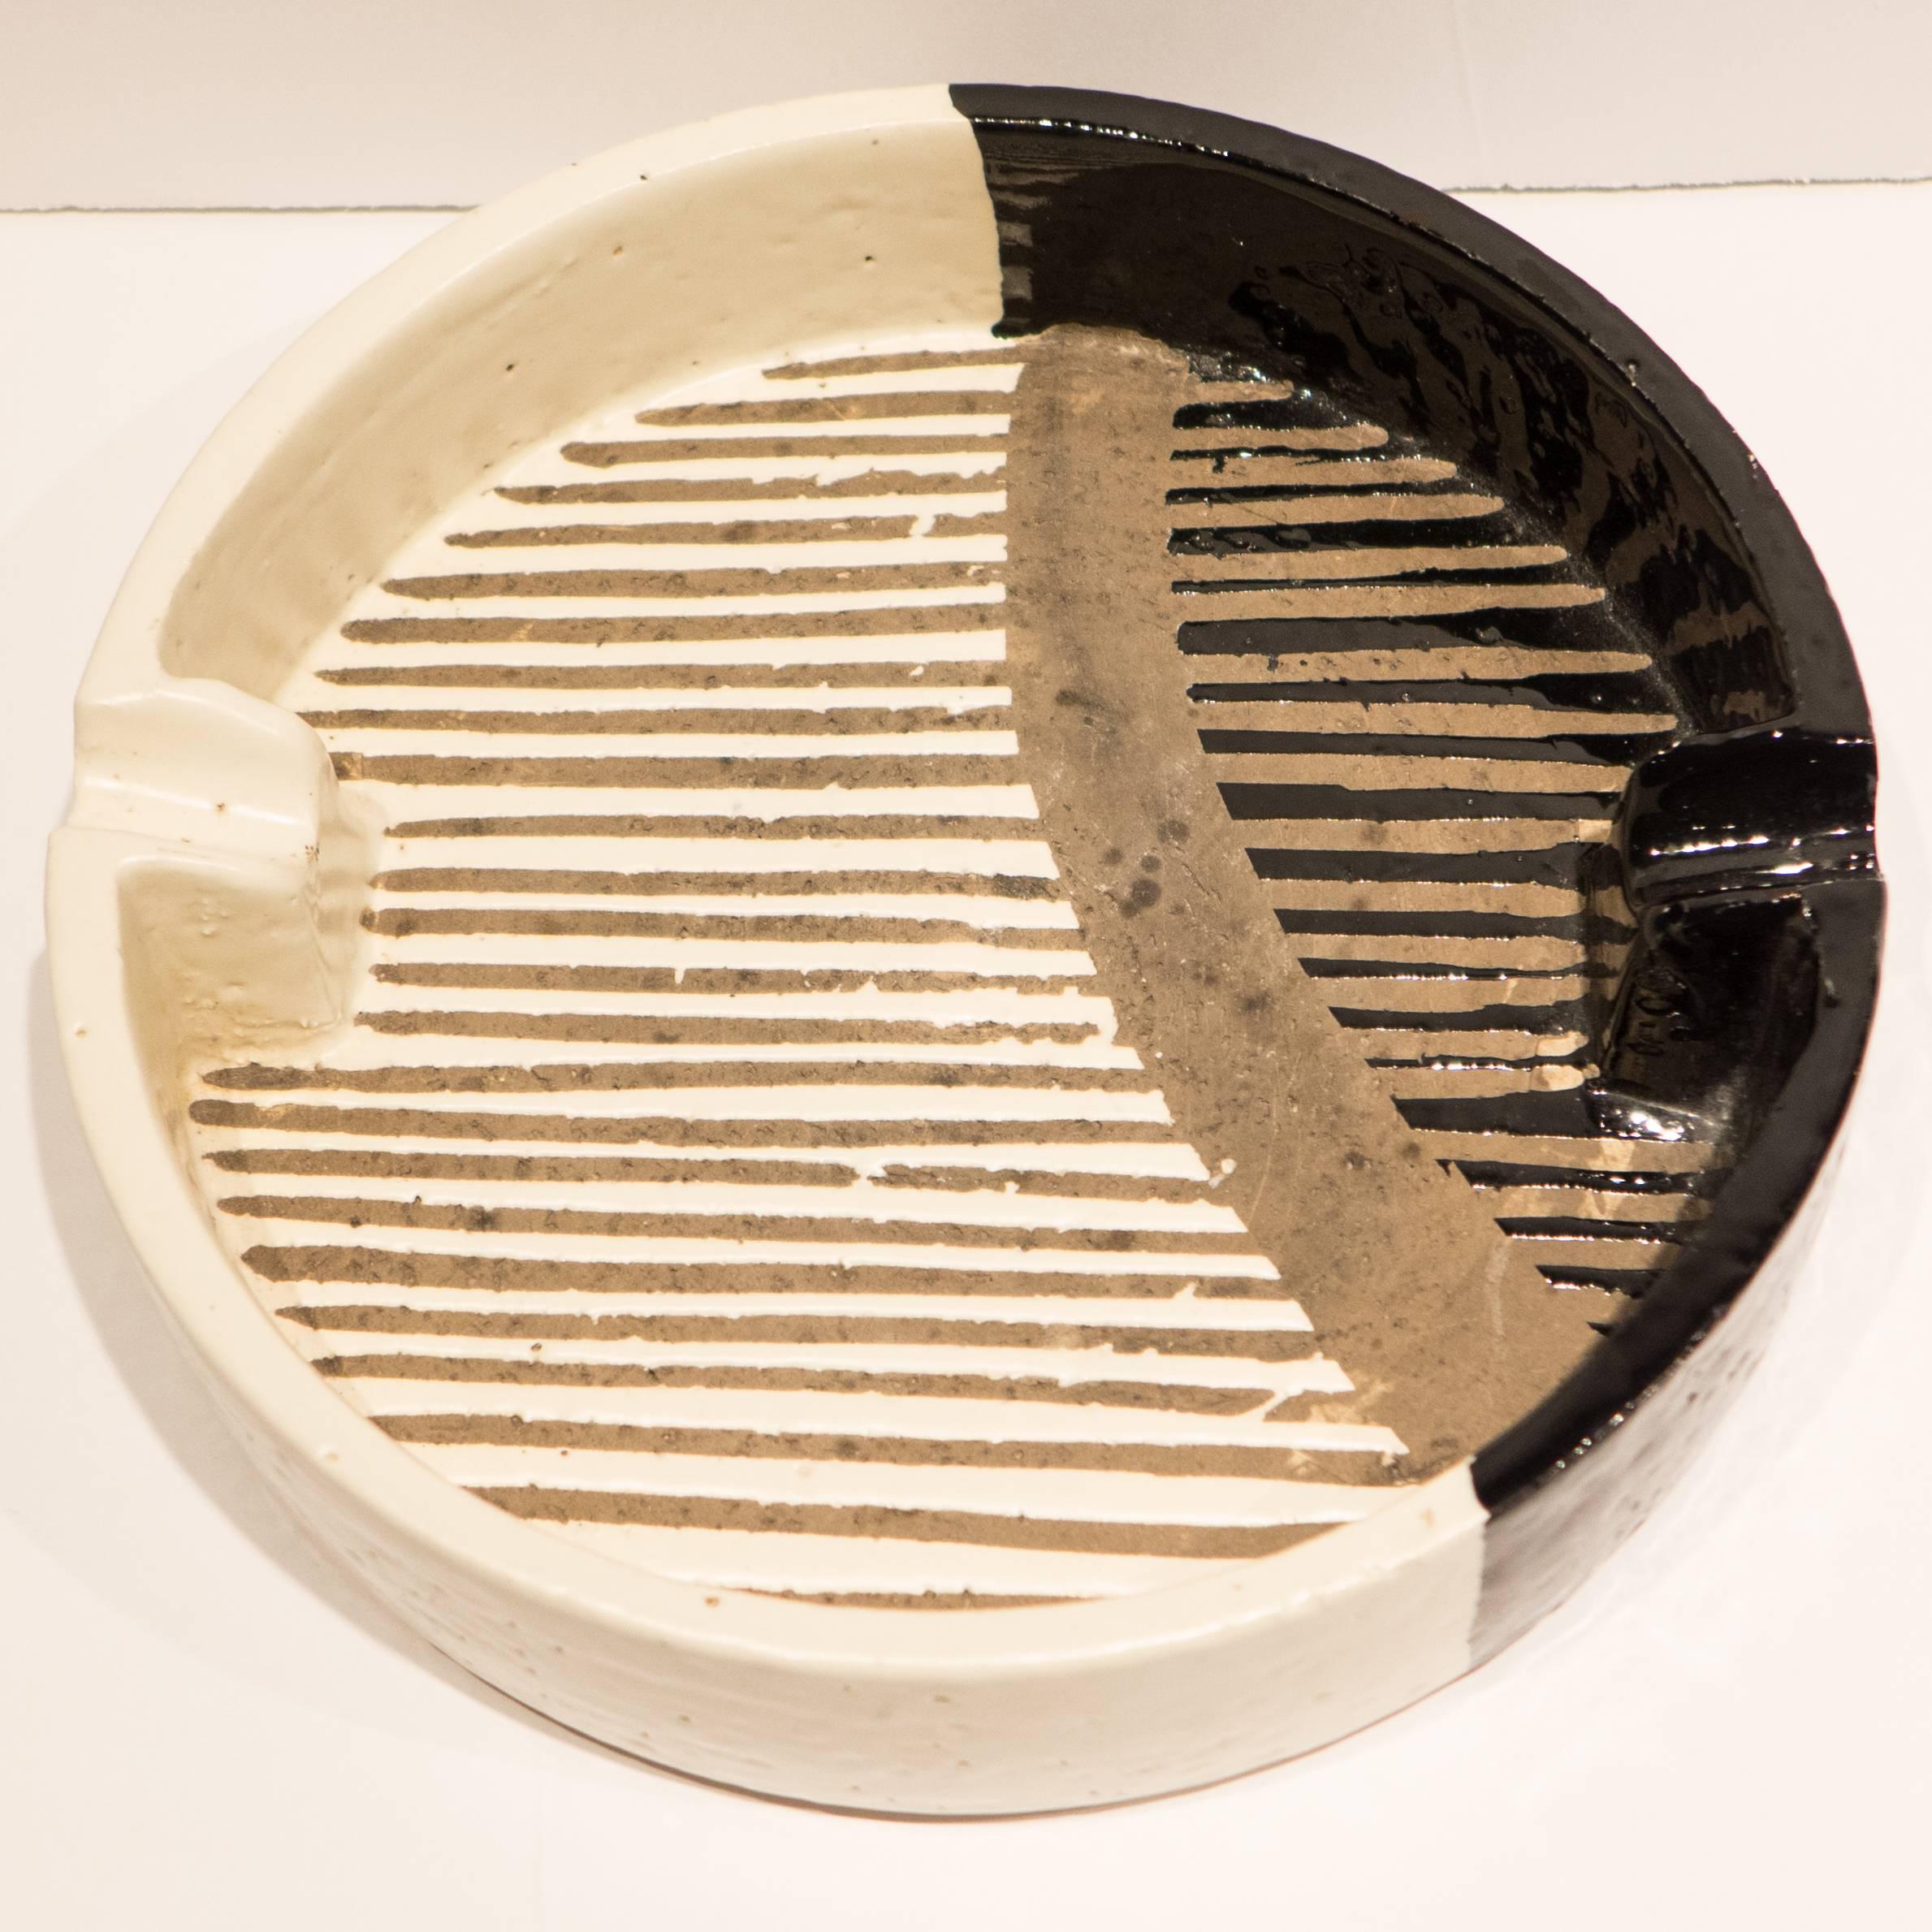 Large dish (or ashtray) with an interesting abstract patterning in black, white, and chamotte. A likely Aldo Londi design, produced by Bitossi for Raymor, circa 1950s. With a Raymor/Bitossi label.